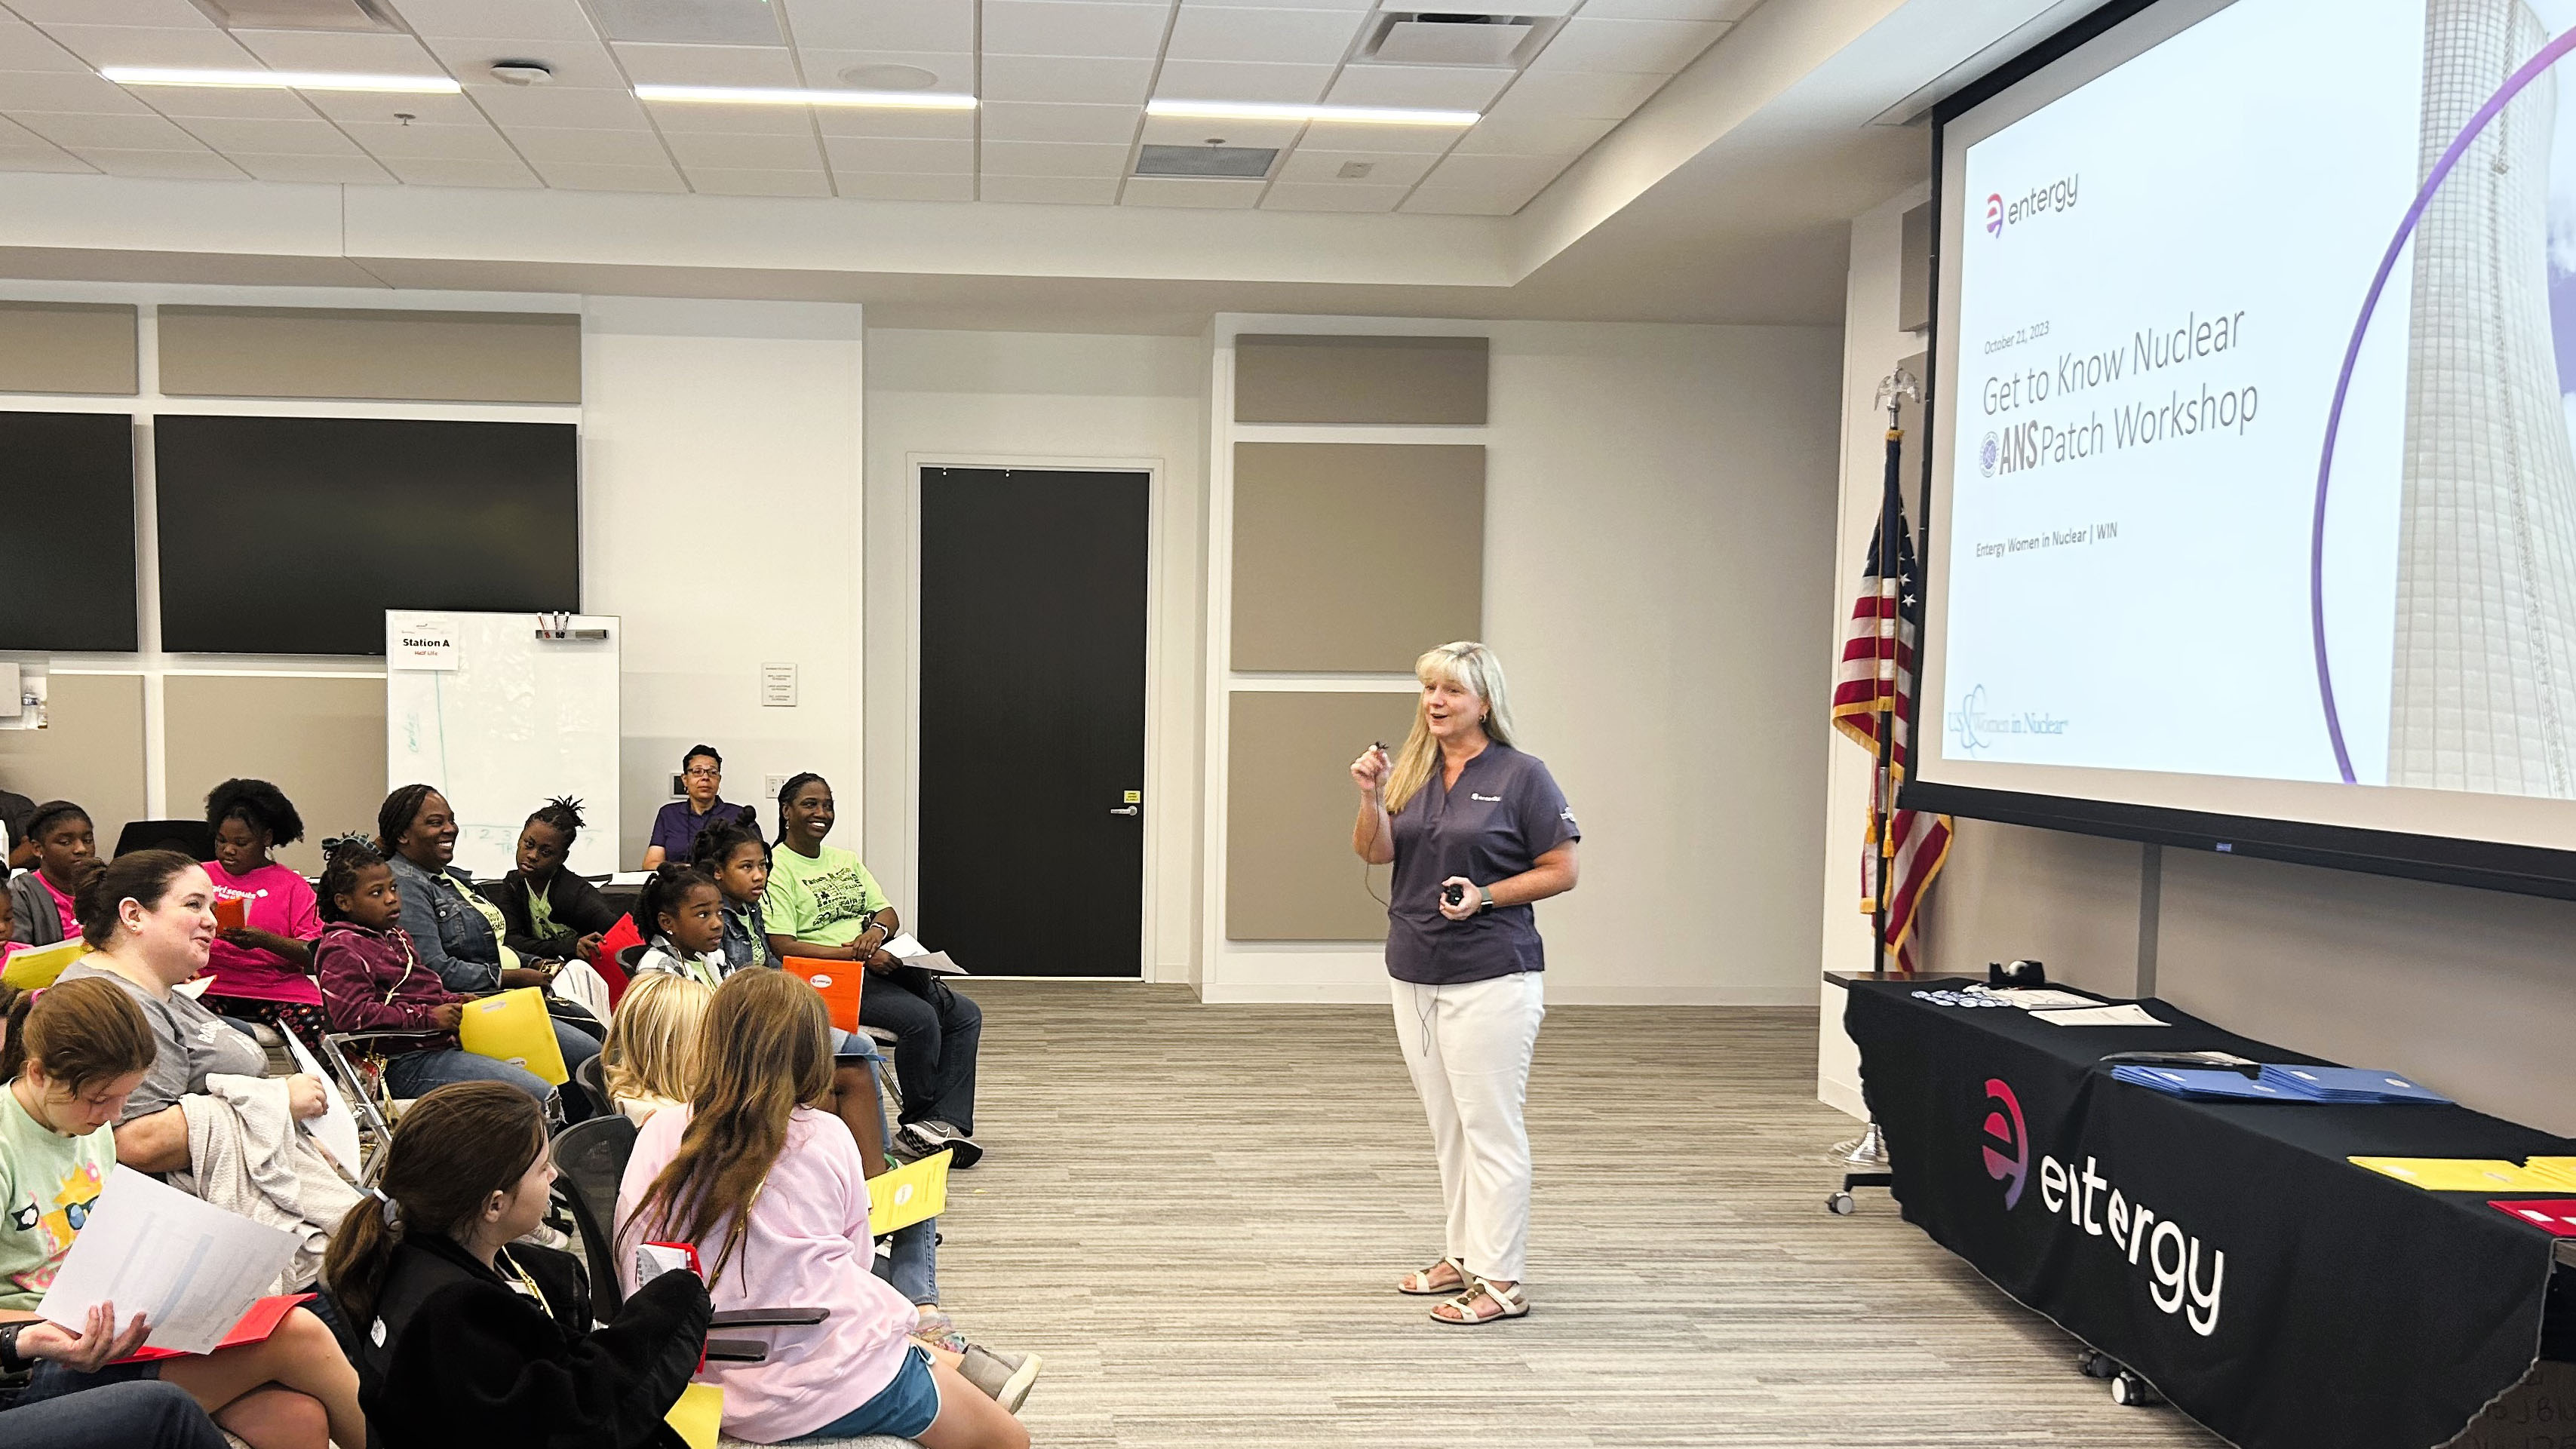 Chief Nuclear Officer Kimberly Cook Nelson speaks to Girl Scouts